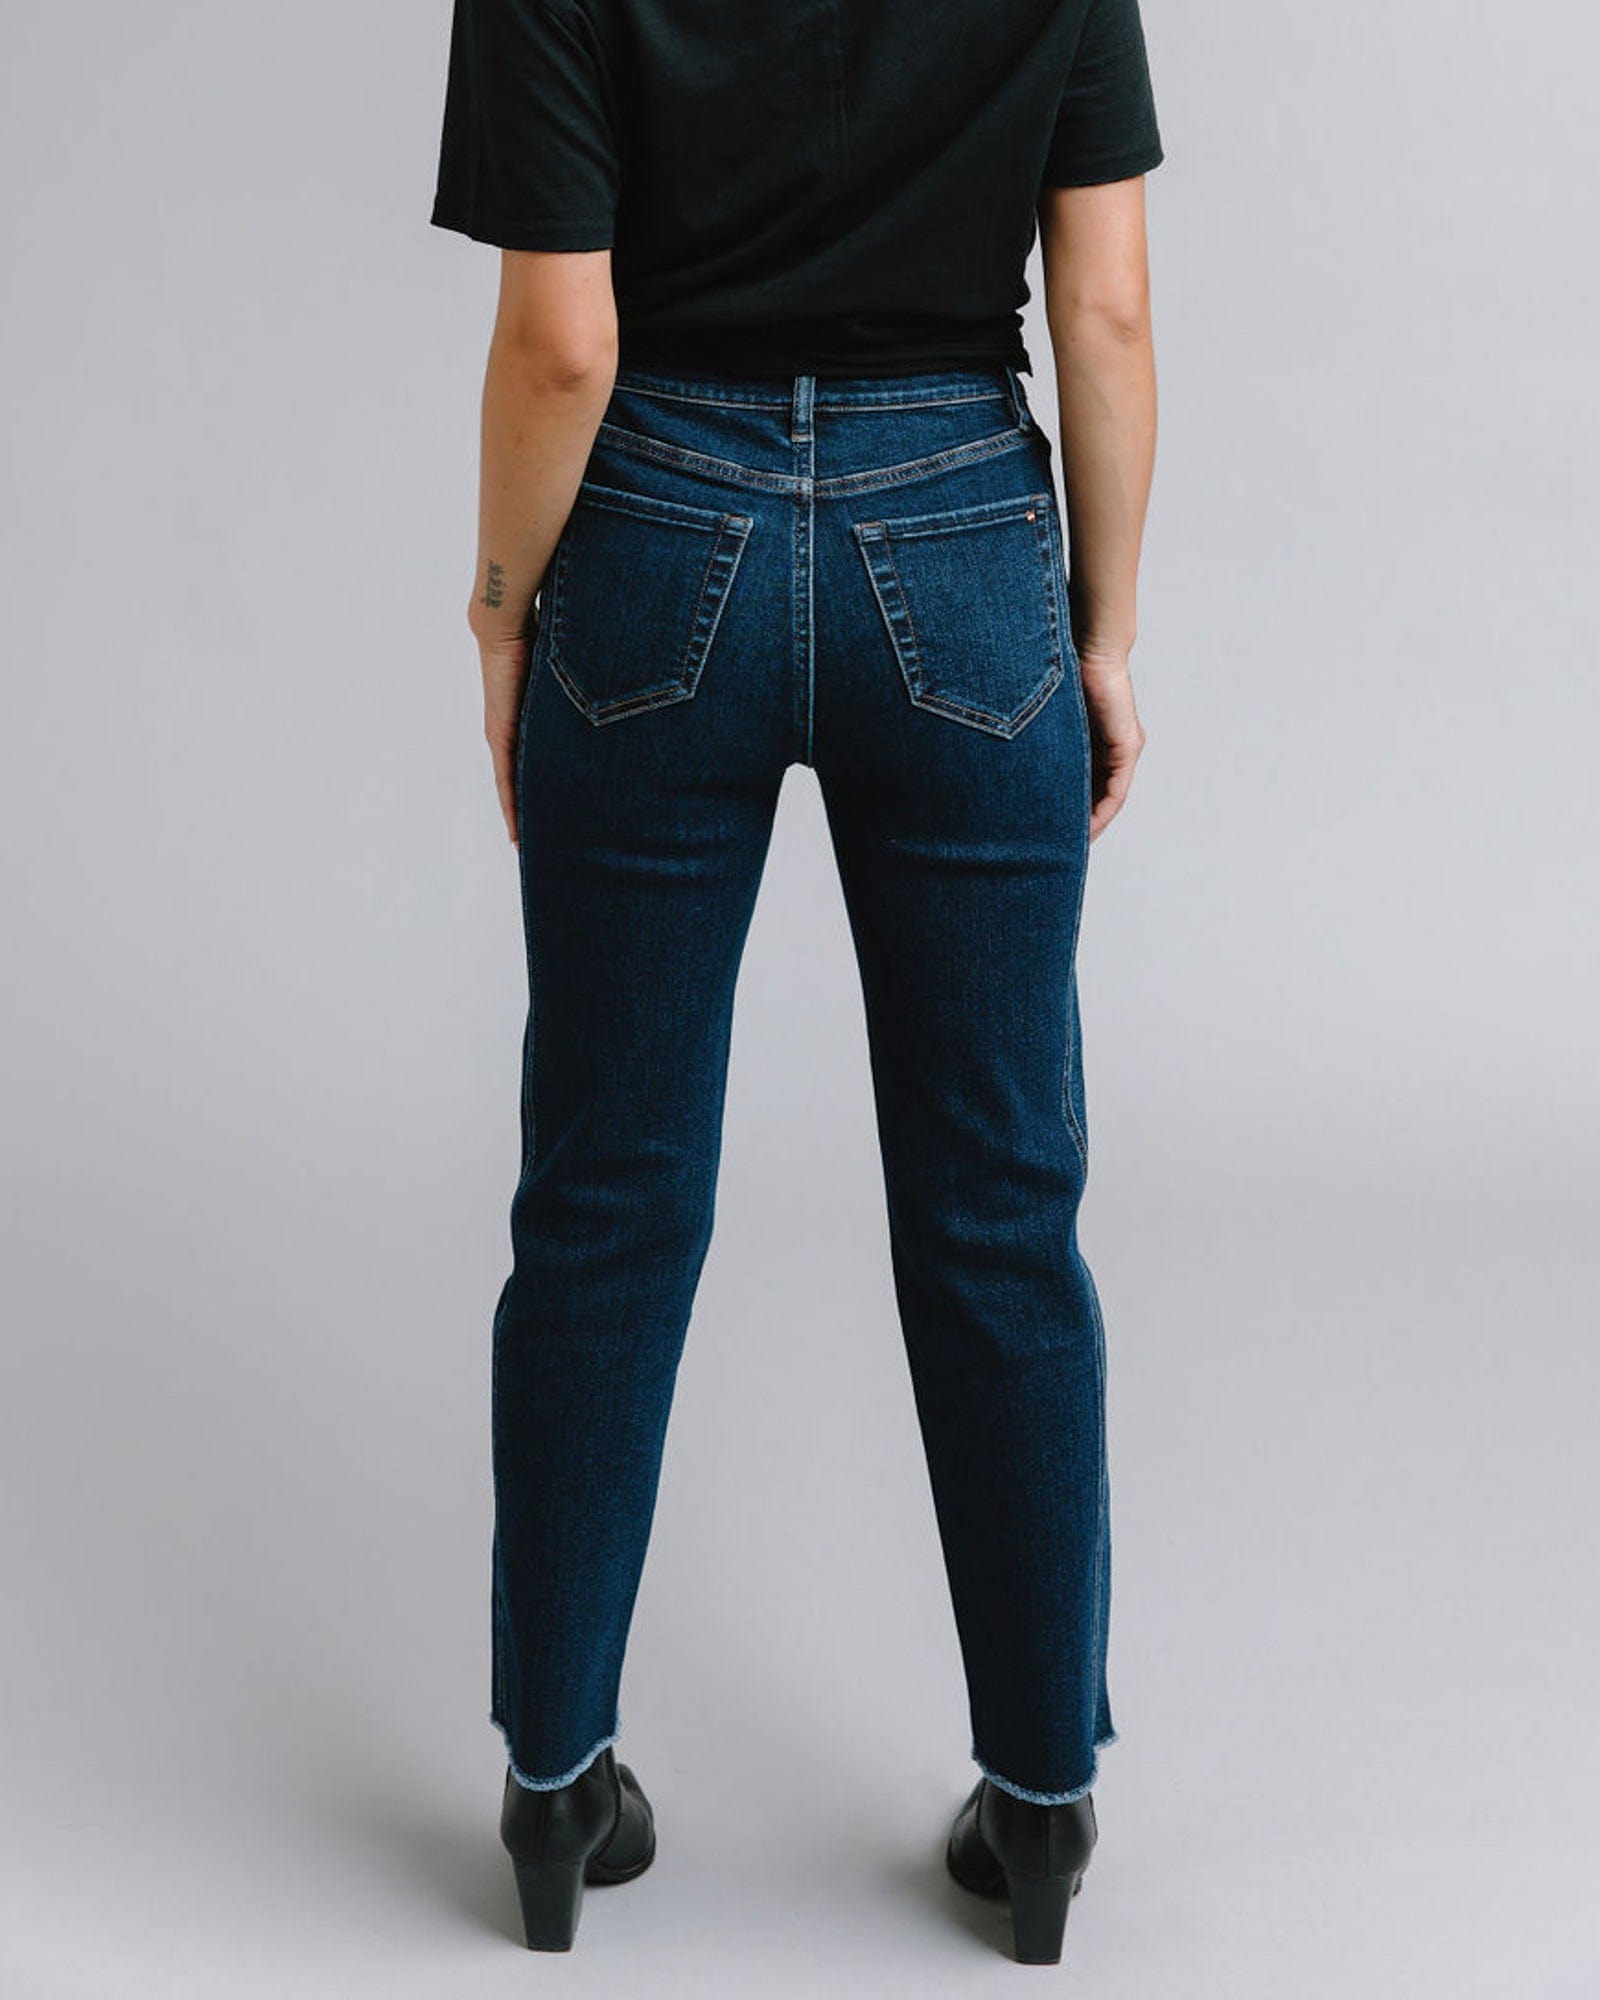 Woman in mid-rise blue jeans